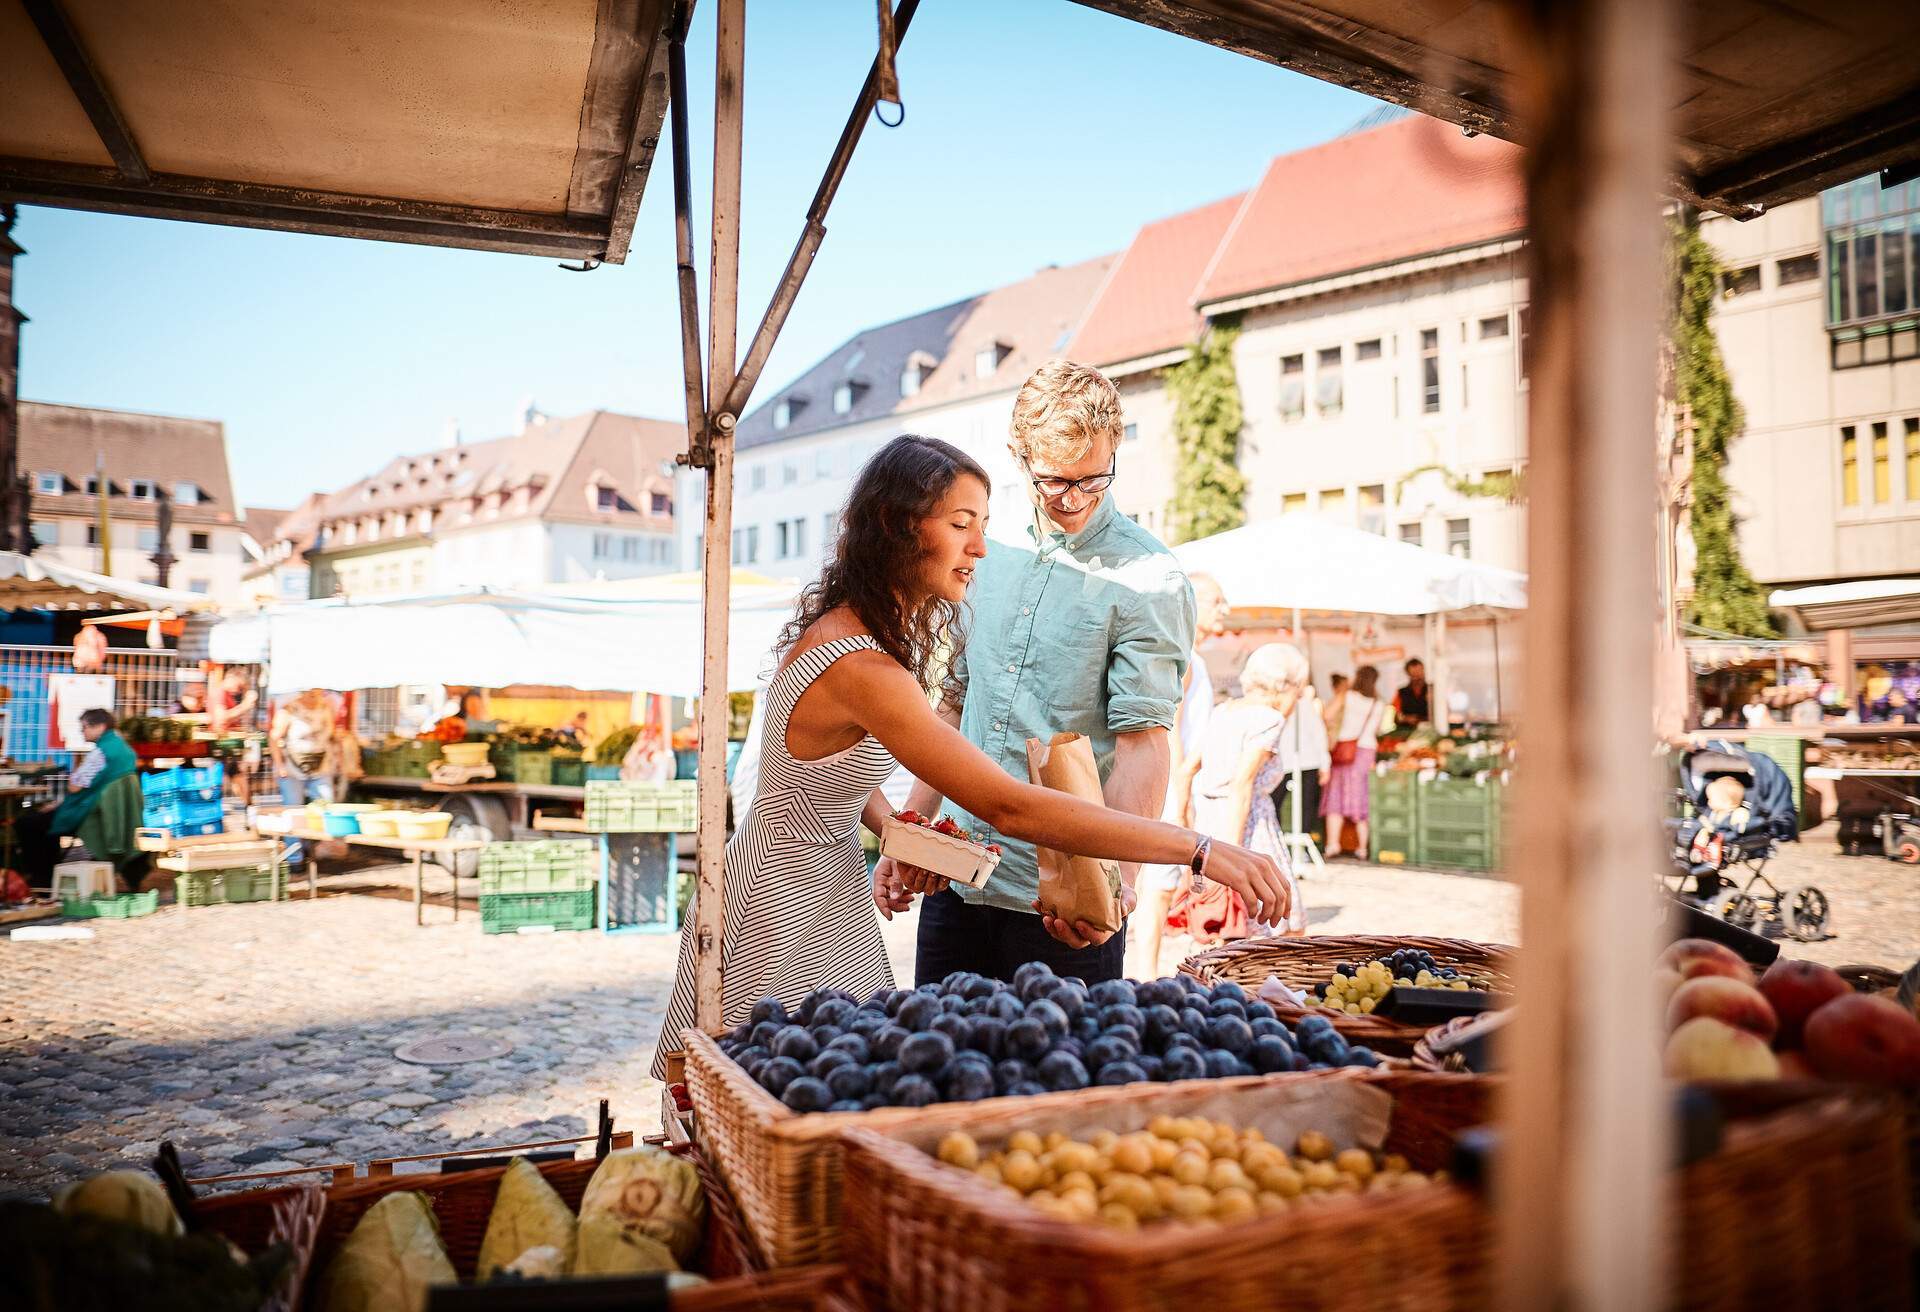 DEST_GERMANY_FREIBURG_THEME_PEOPLE_COUPLE_MARKET_GettyImages-1147568041